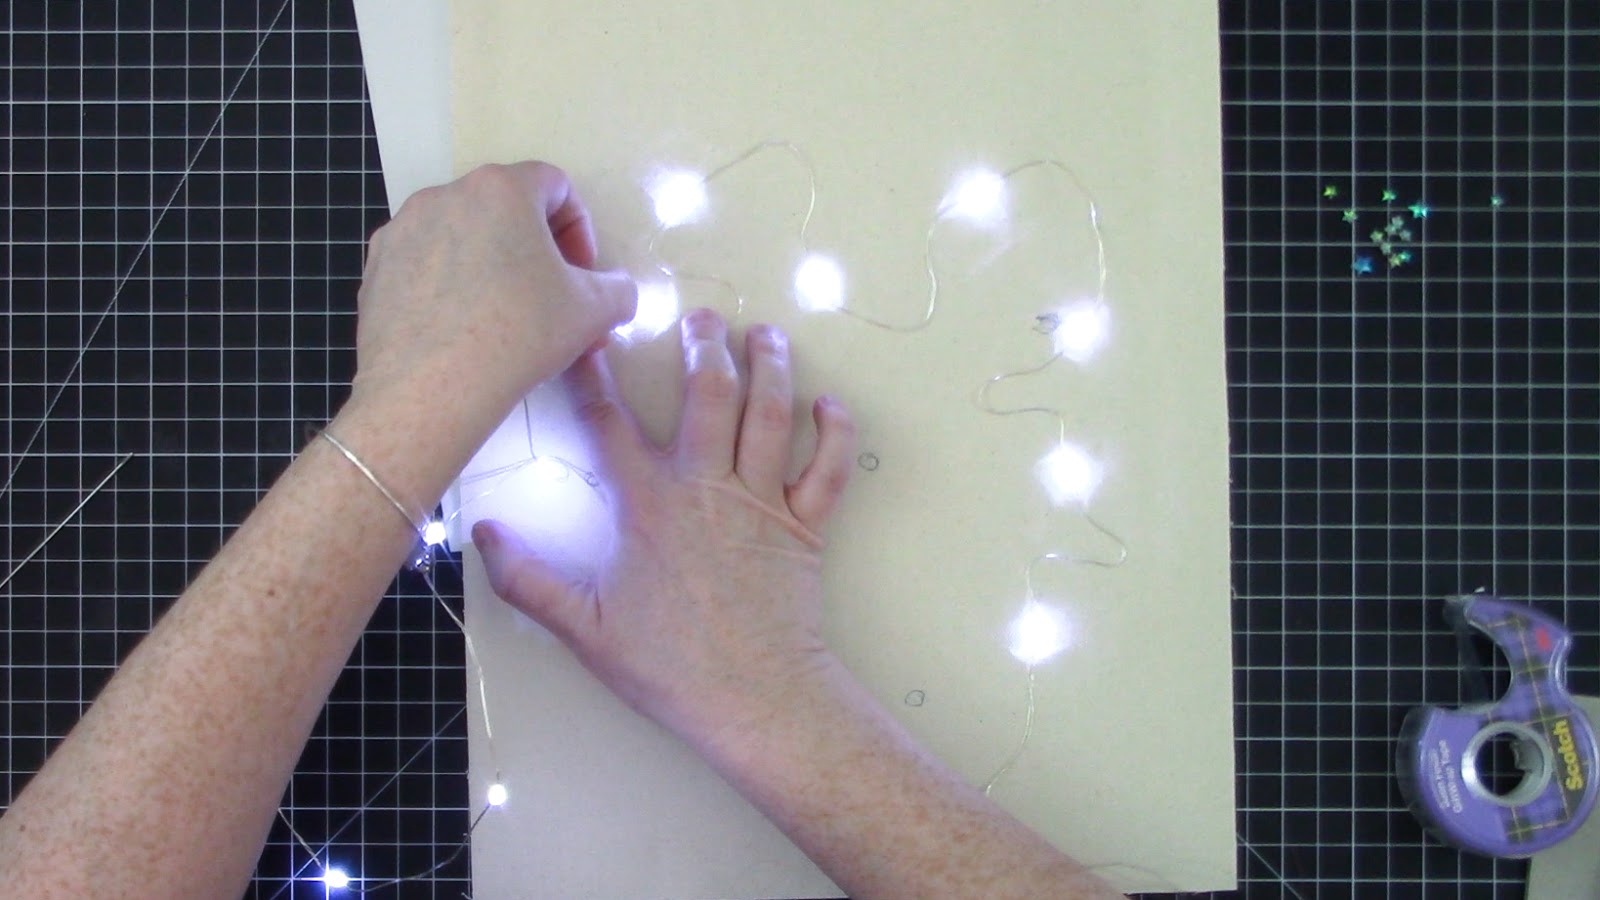 How to Make a Reverse Canvas with Lights - Silhouette School